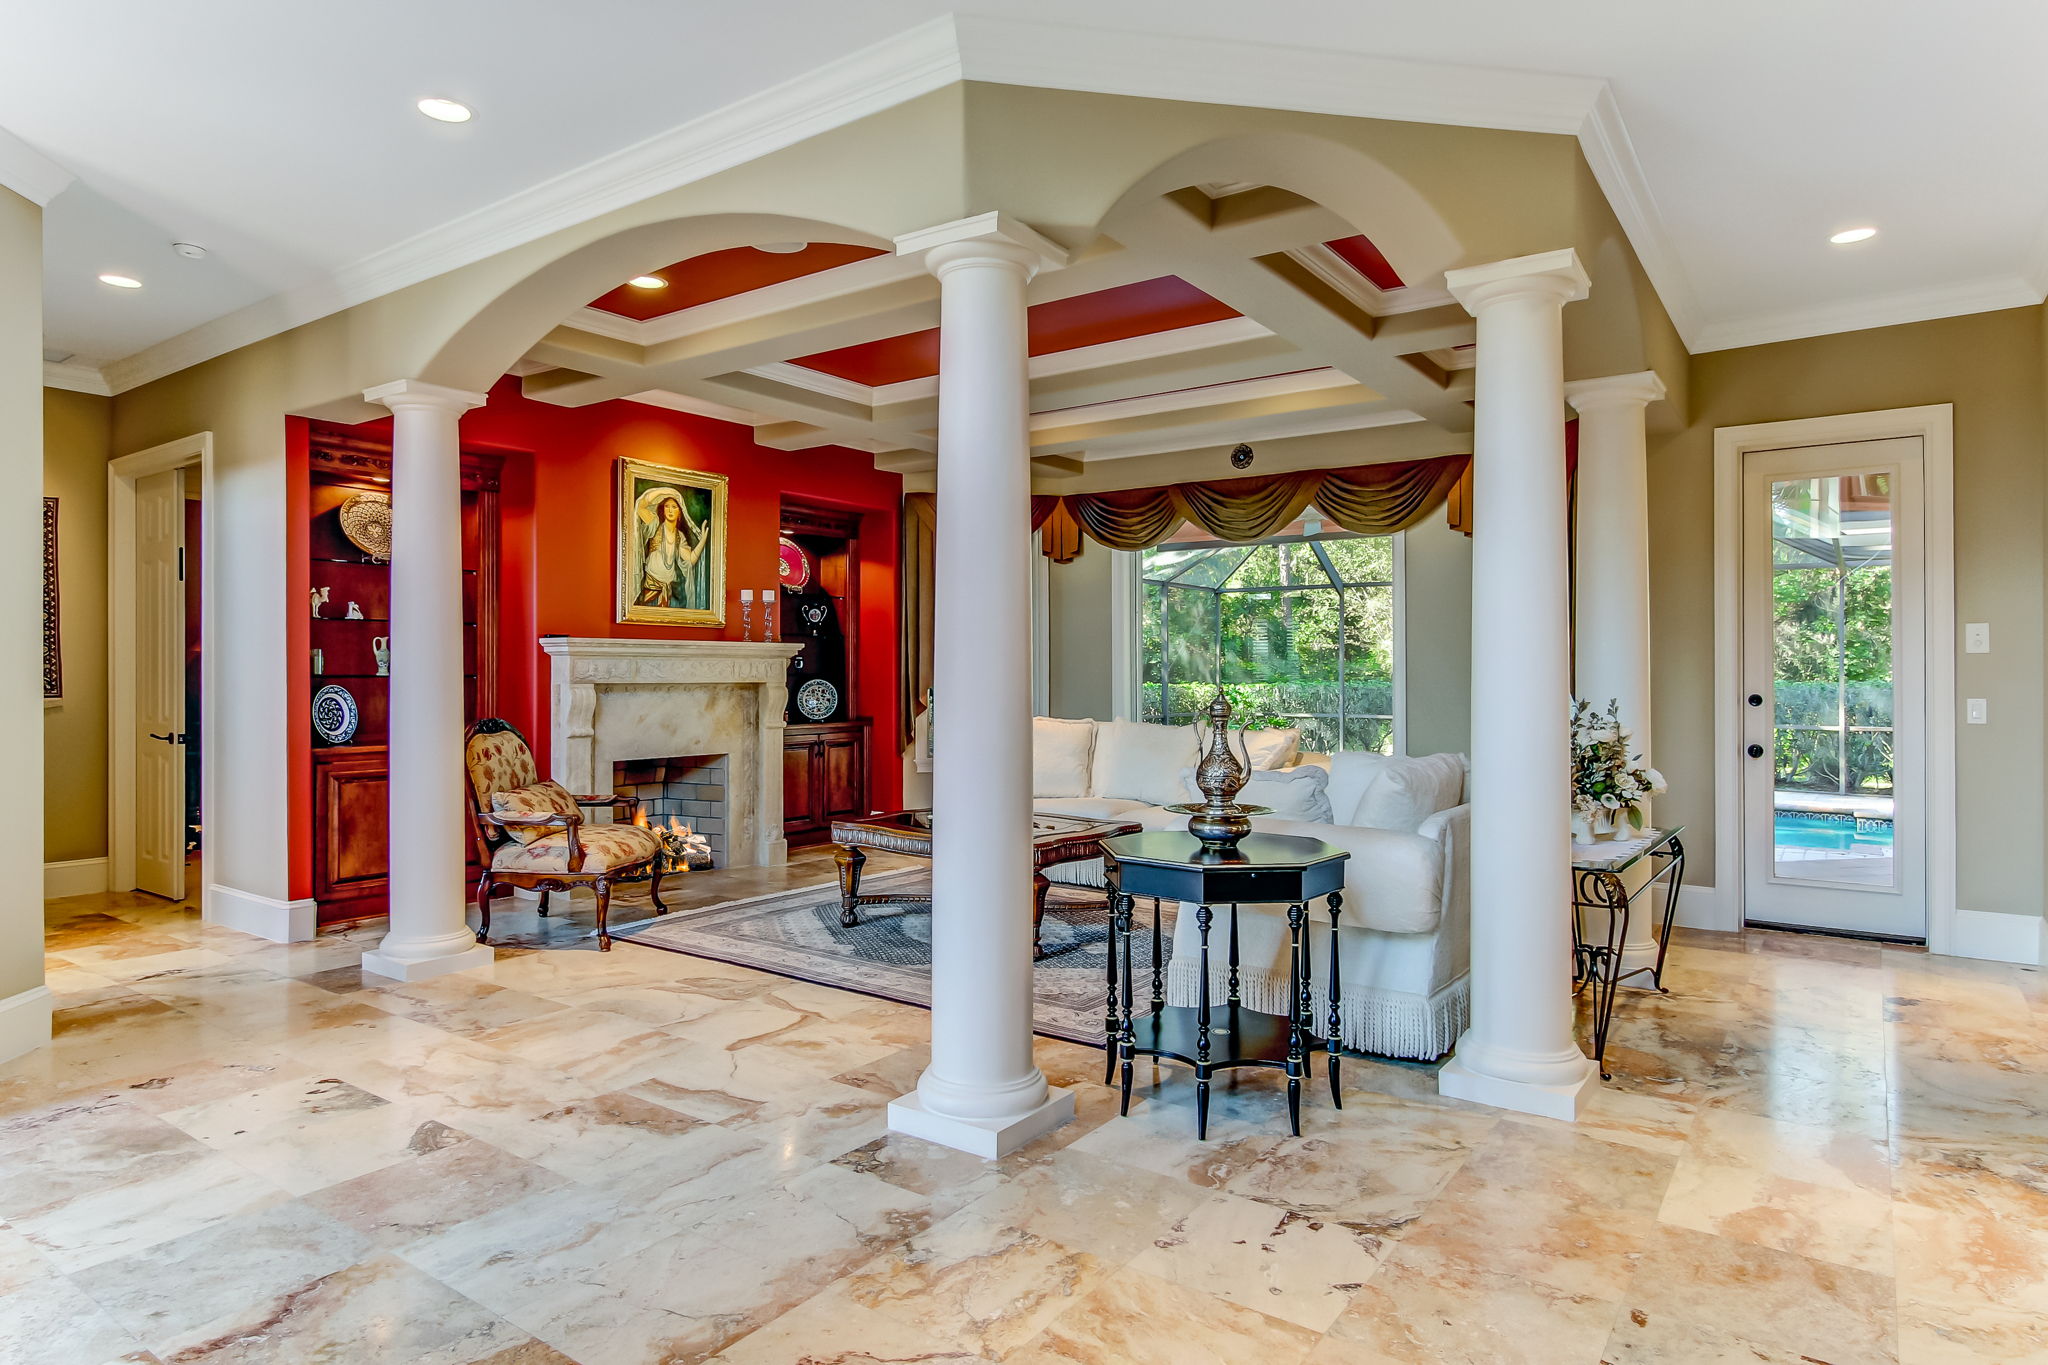 Decorative Arches, Columns & Coffered Ceiling